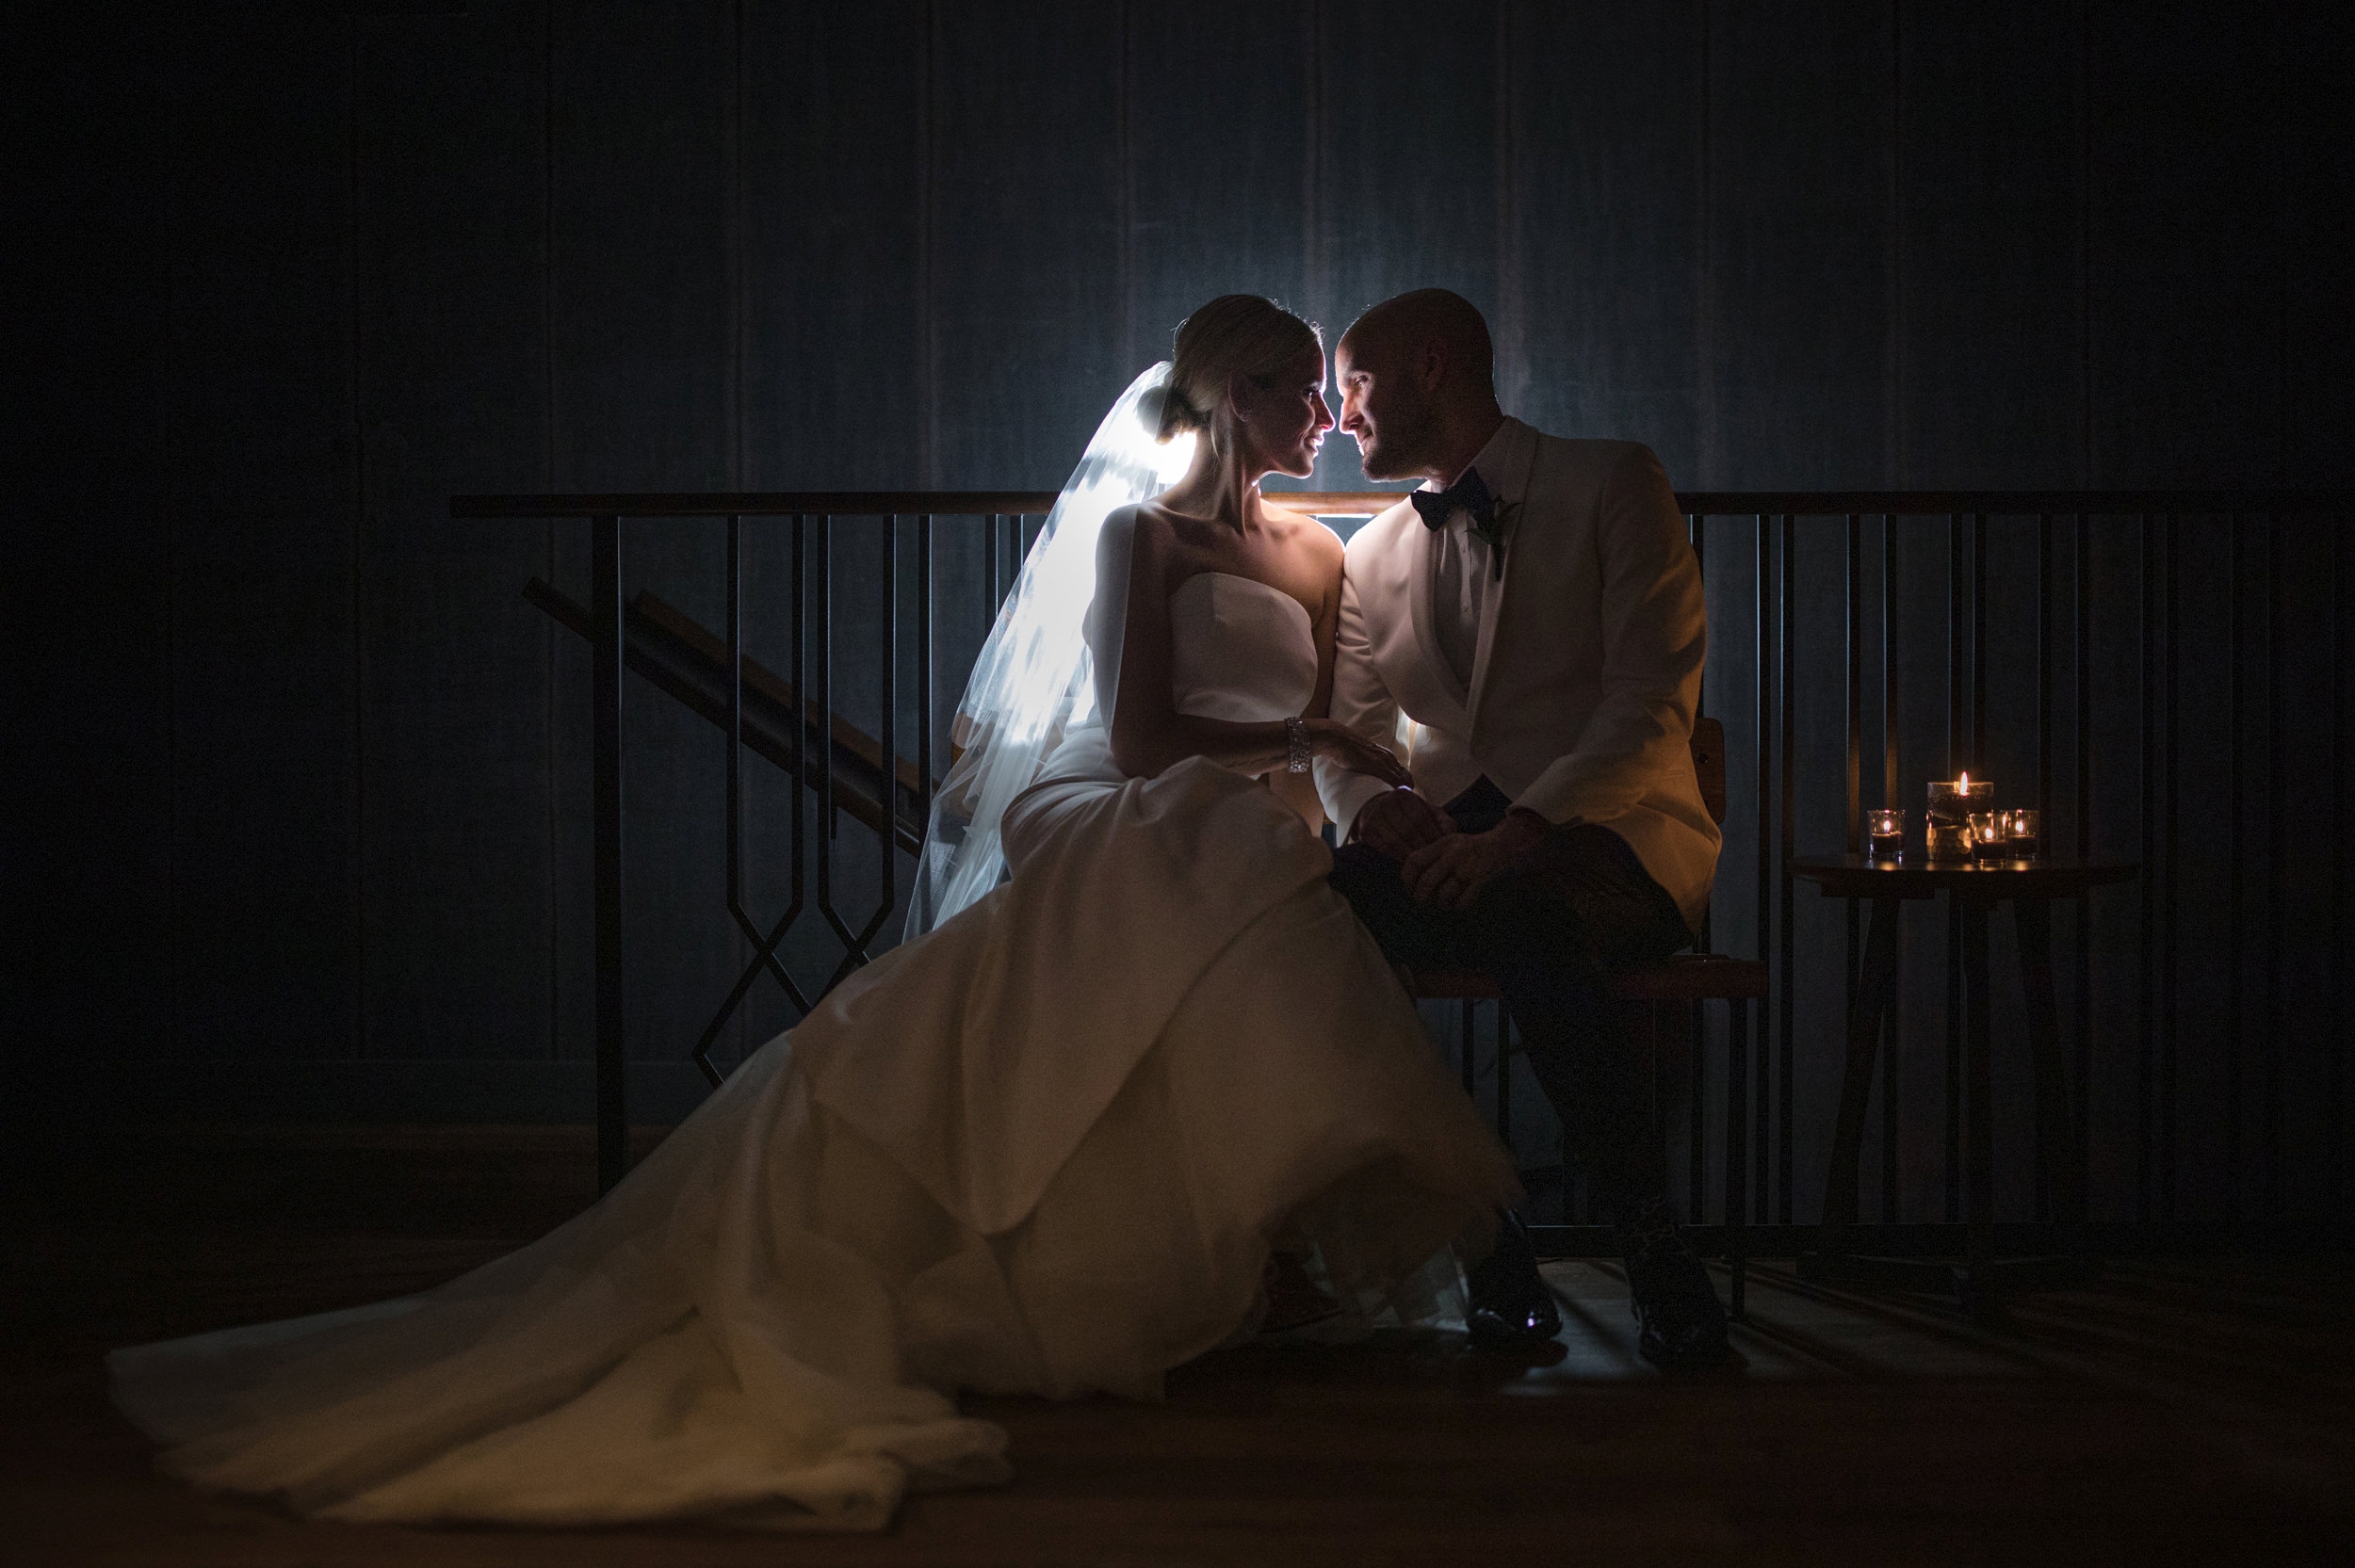 A bride and groom, amidst the romantic ambiance of the Fitler Club, sit together on a staircase in the dark during their enchanting wedding day.